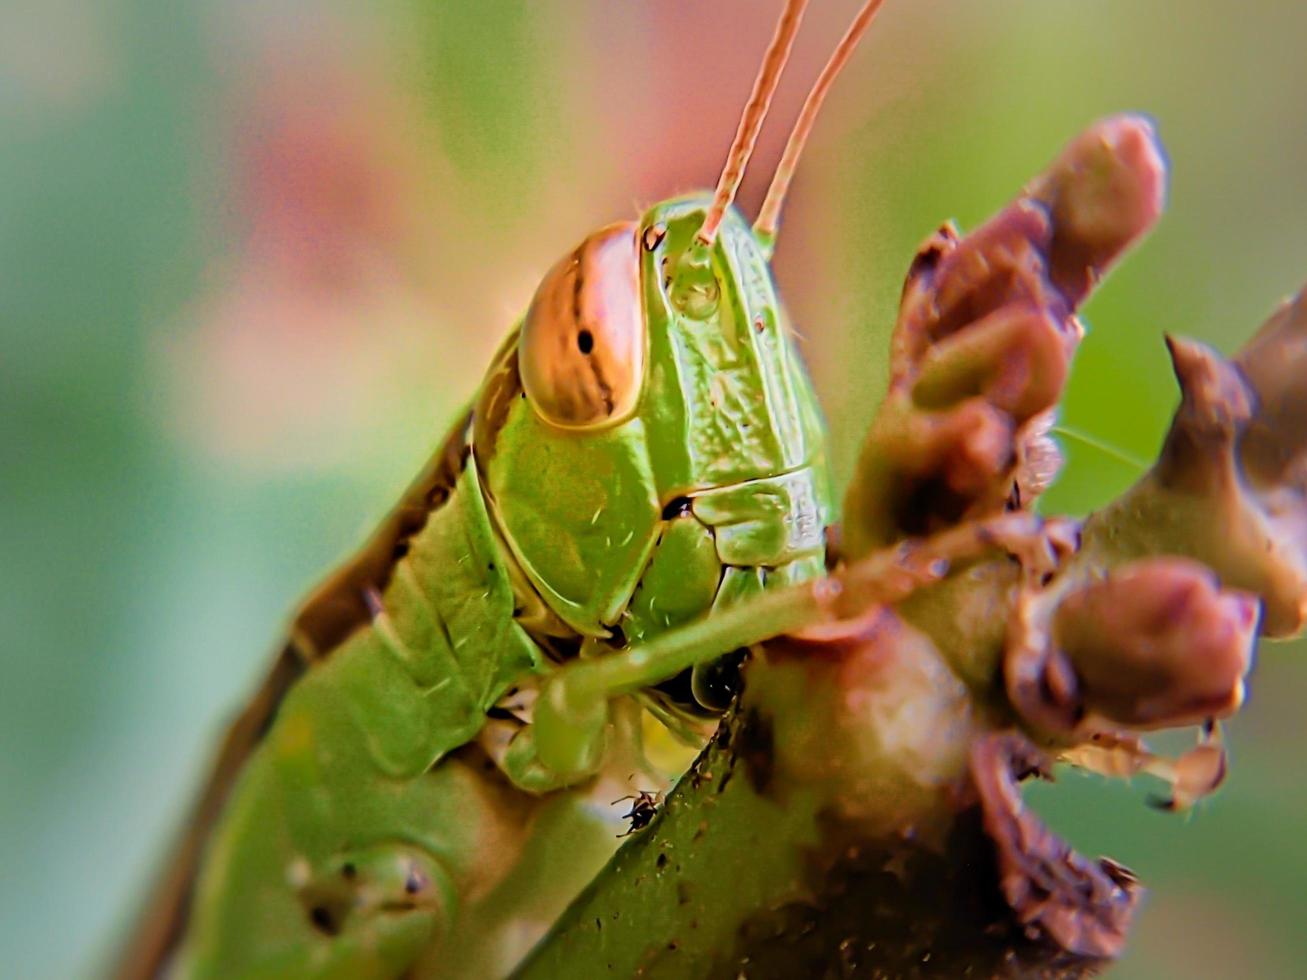 Grasshopper on a plant stem with blurred background. Animal macro photo. photo